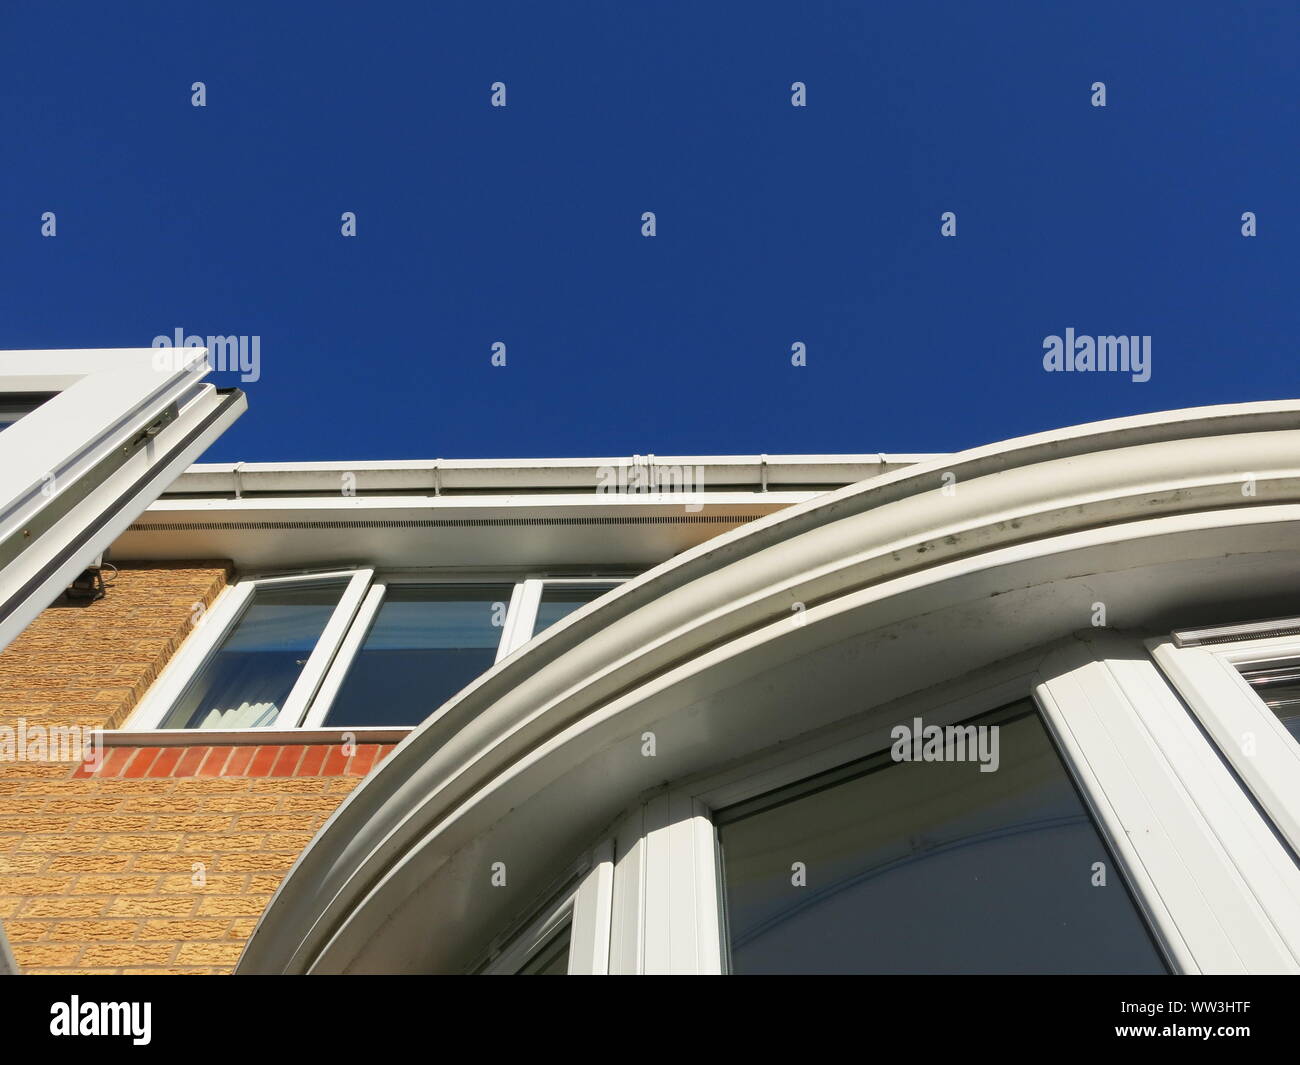 Abstract photo of verticals, horizontals and curves in white pvc on a modern house elevation looking up towards a very blue sky Stock Photo